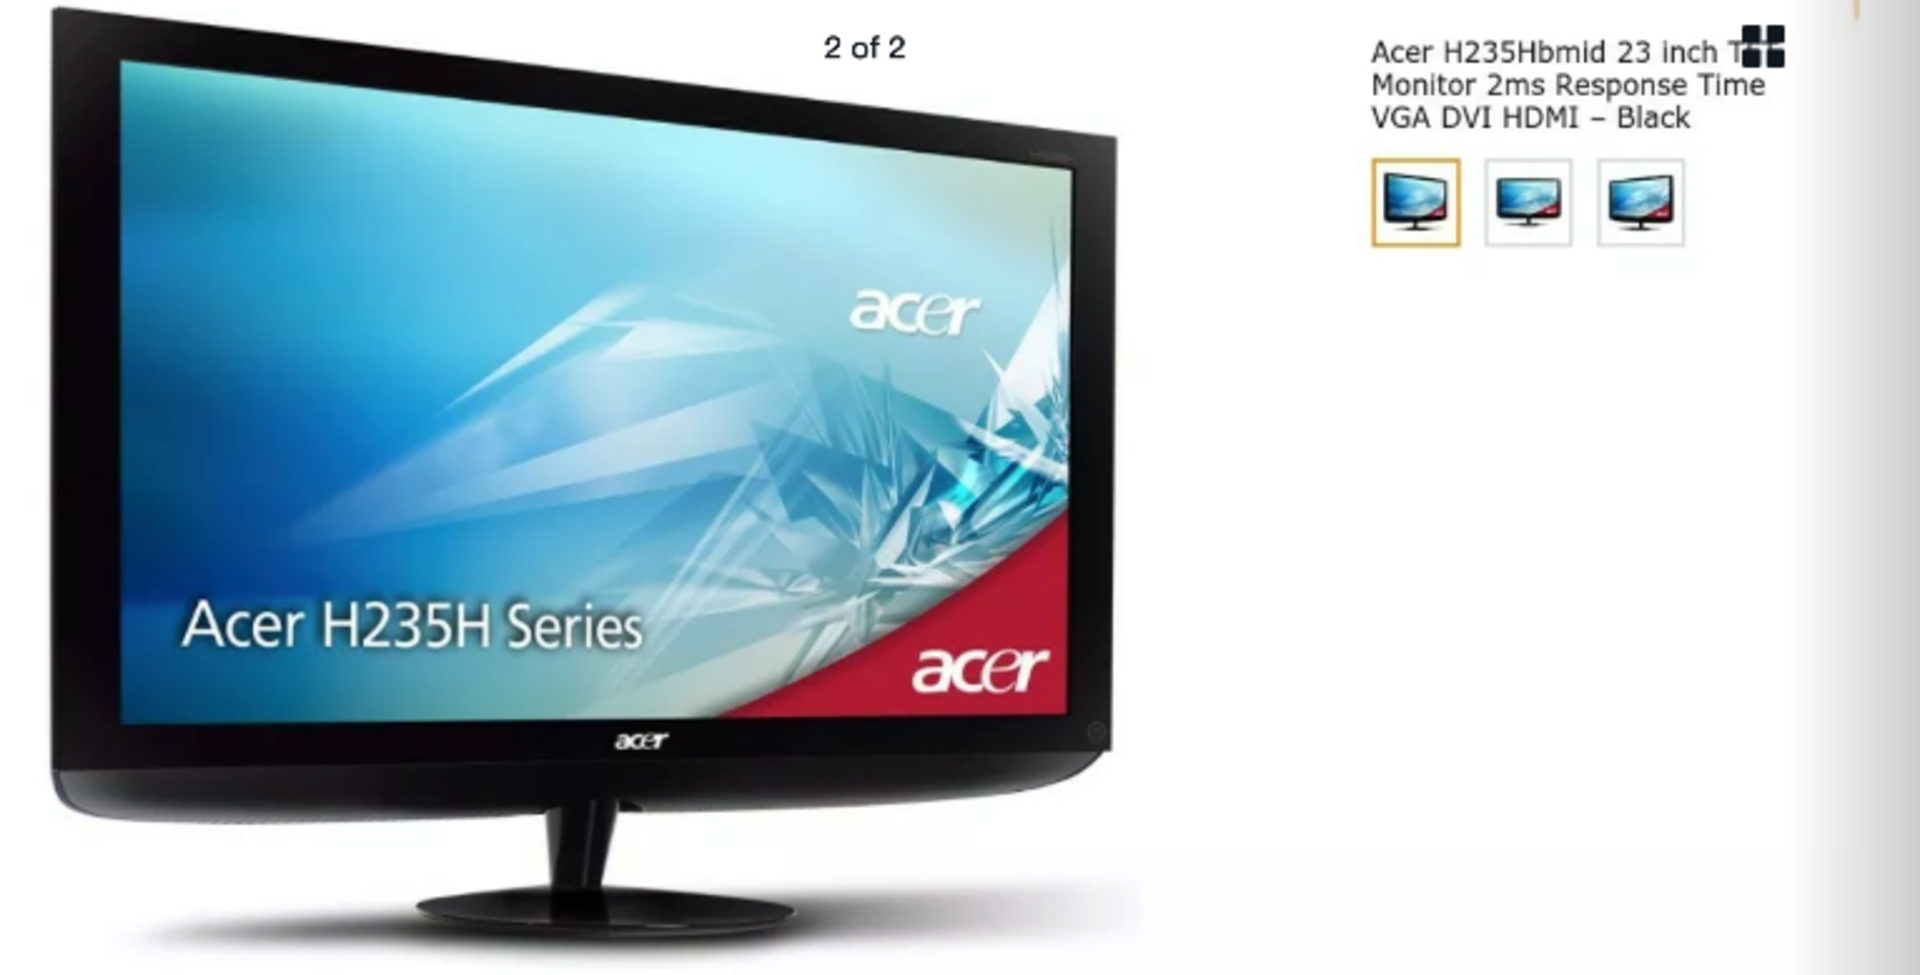 Acer H235H 23-Inch Flat Screen Lcd, Tft Monitor - Image 2 of 2